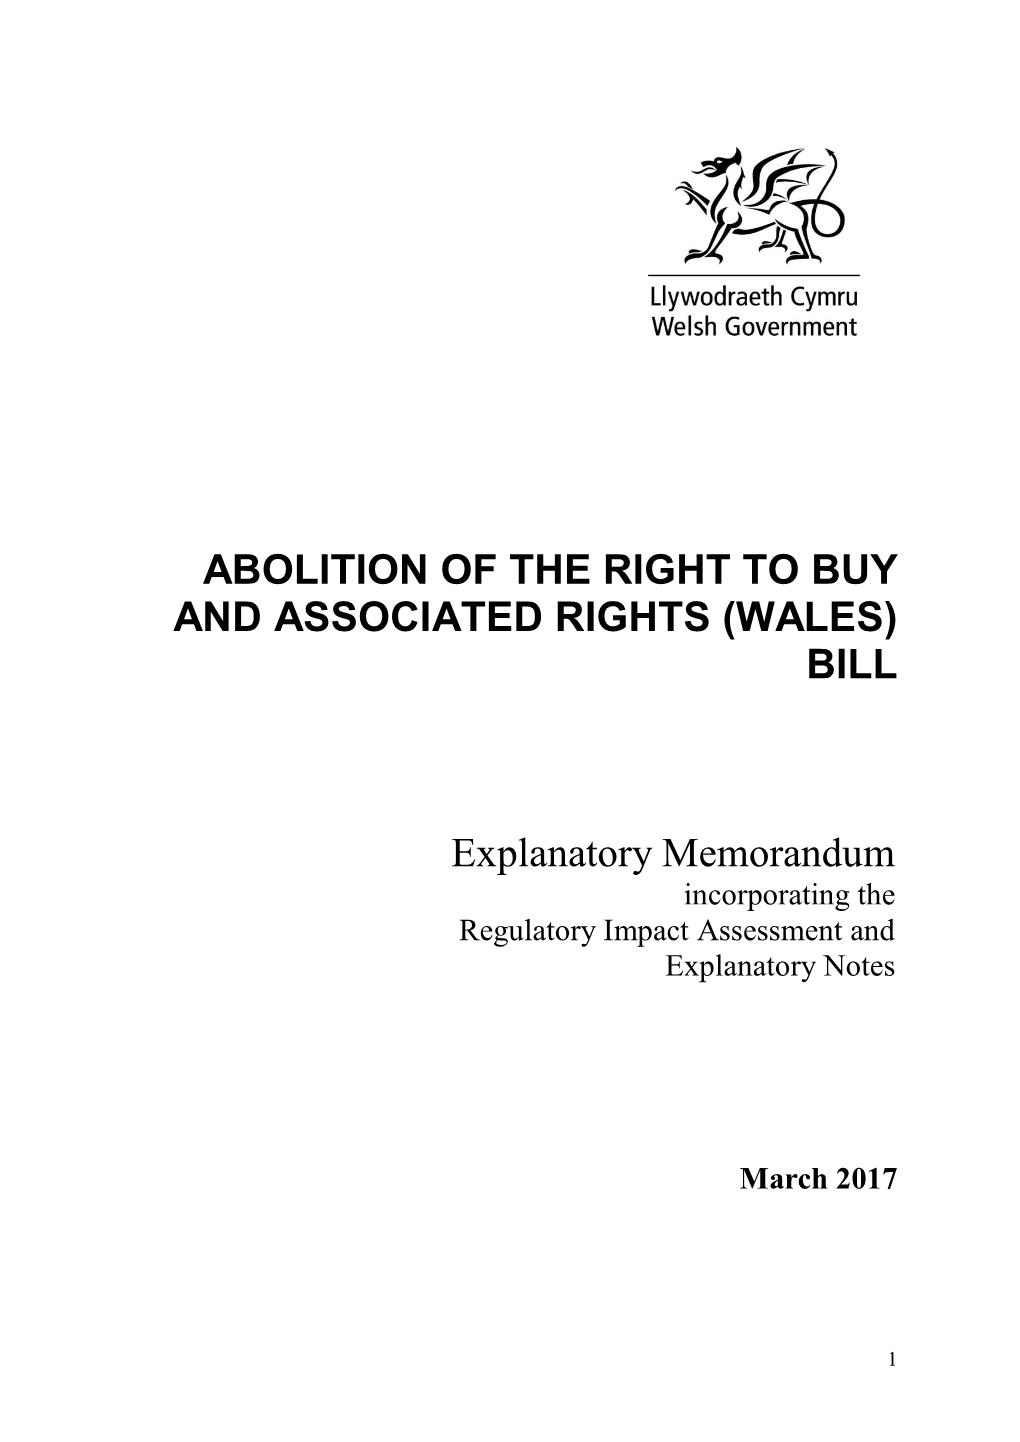 Abolition of the Right to Buy and Associated Rights (Wales) Bill